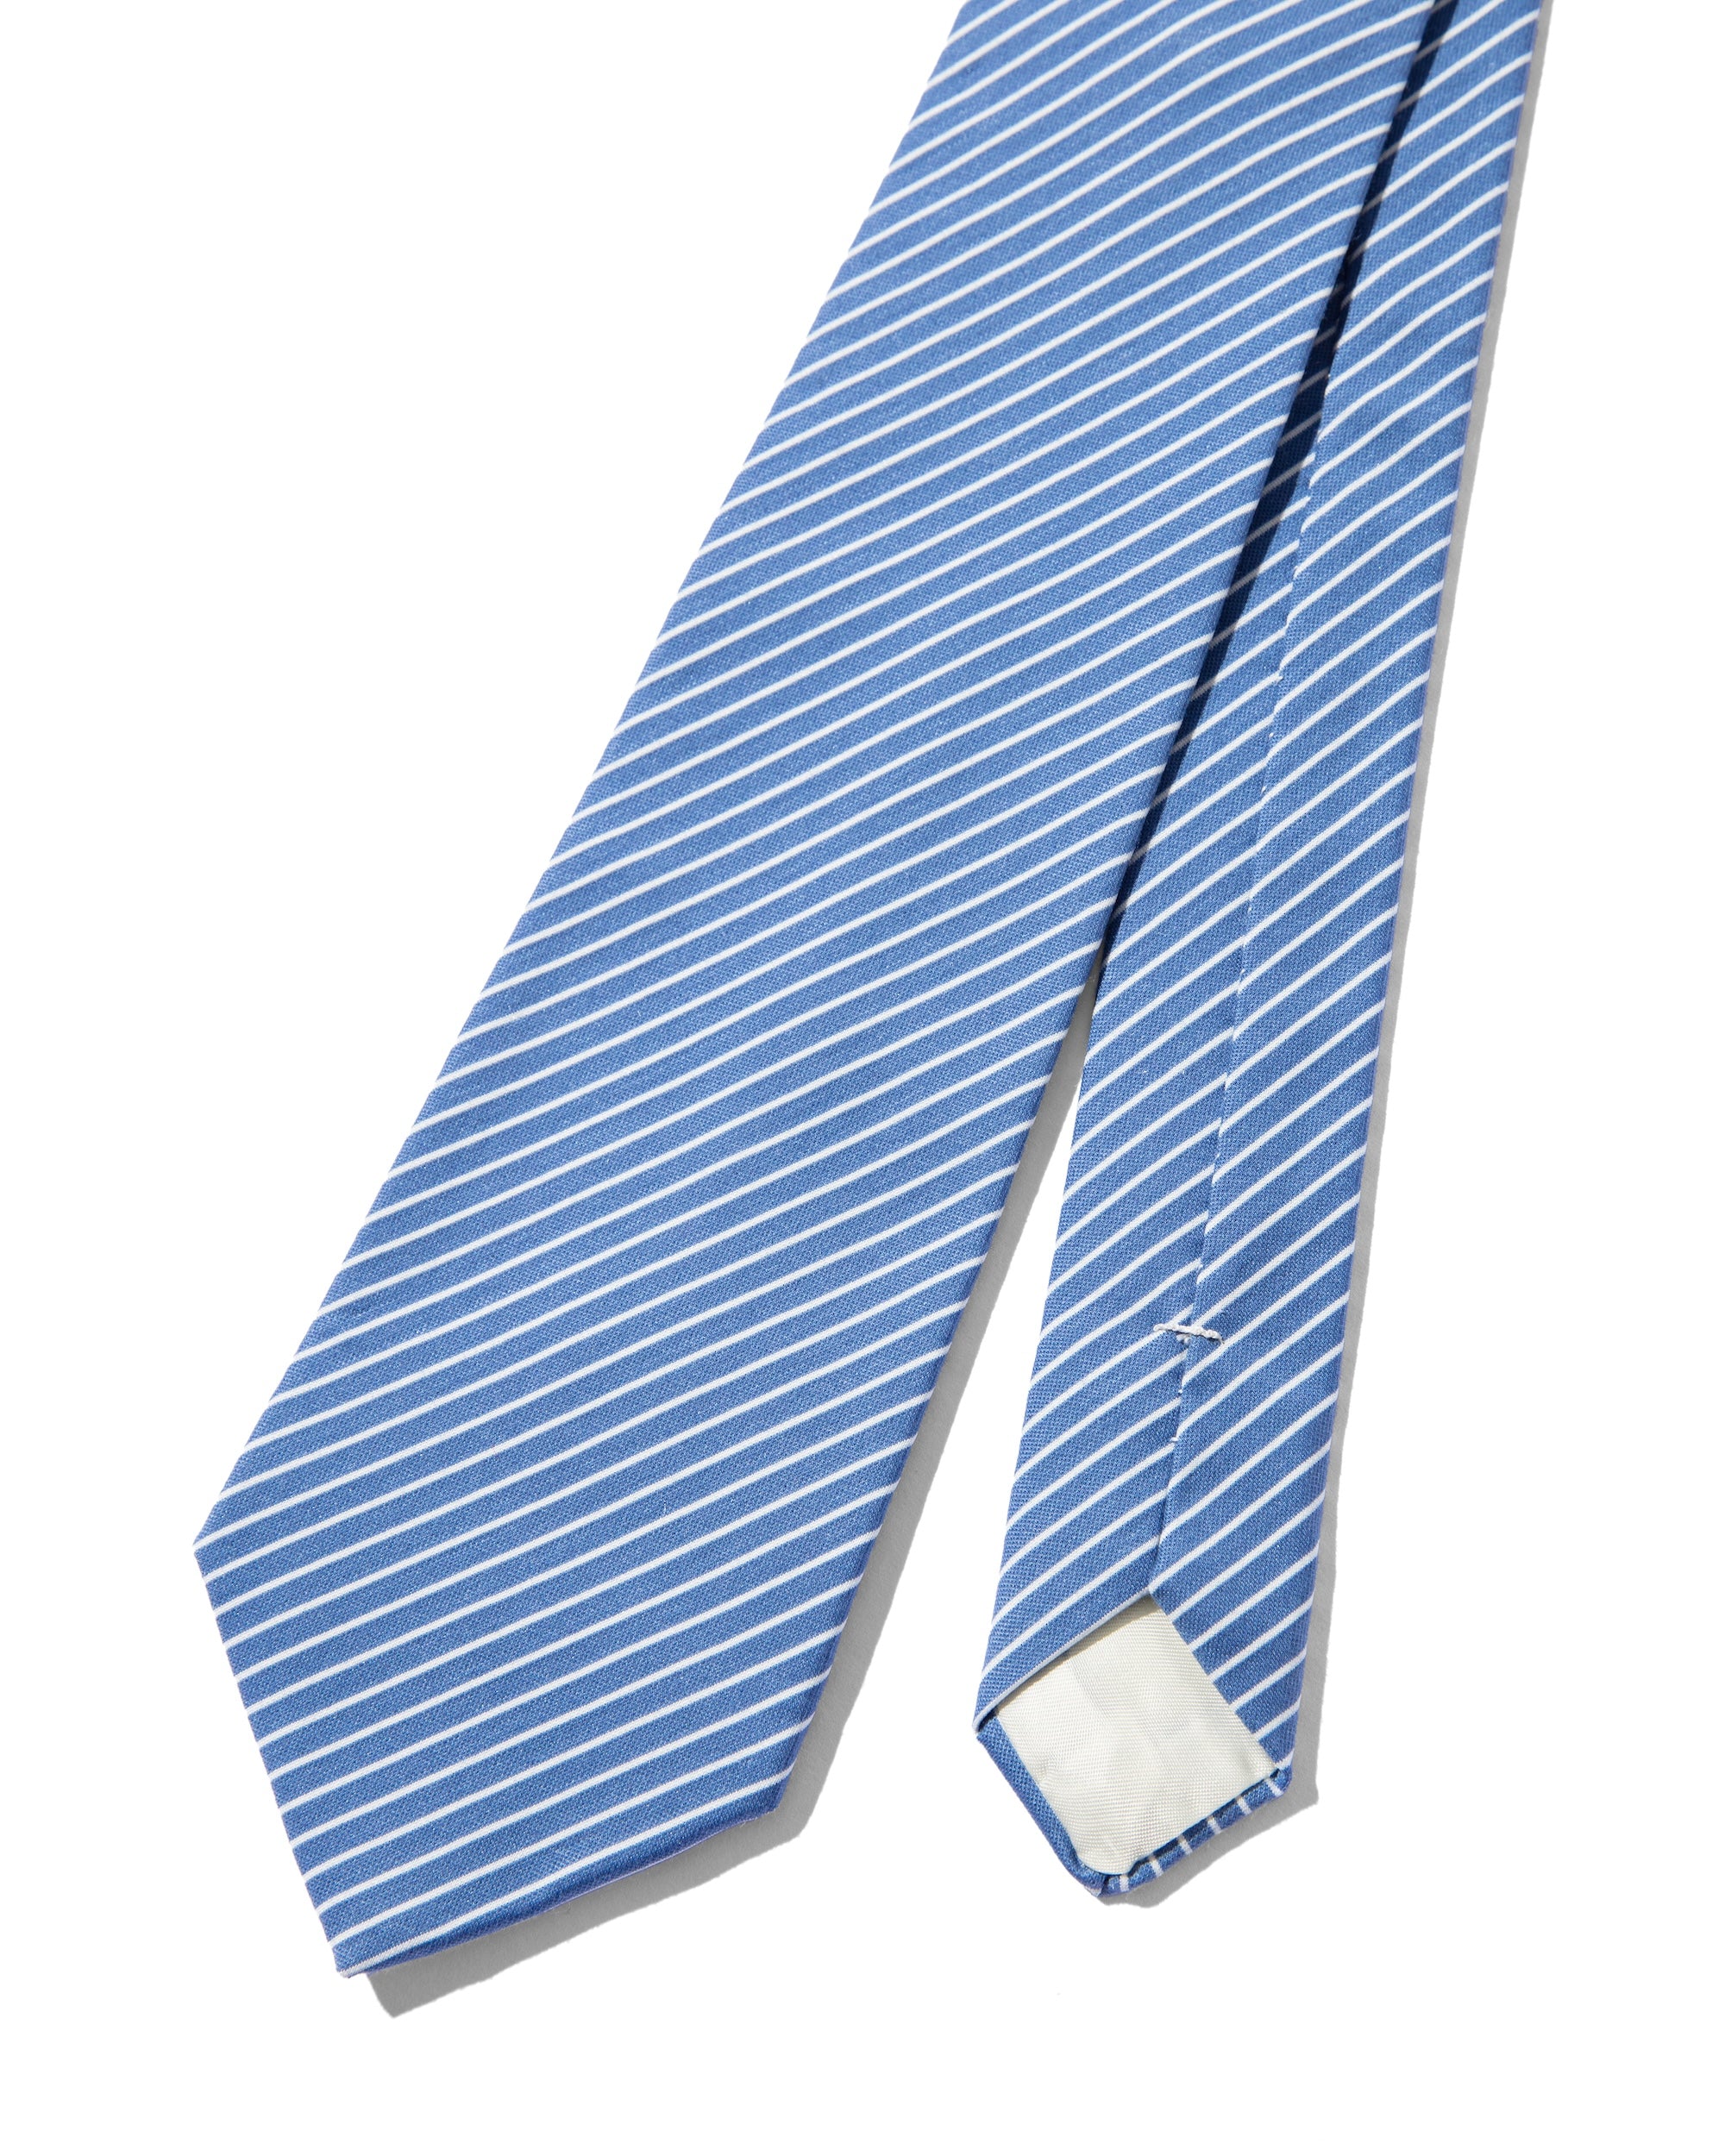 【5.8 WED 20:00- IN STOCK】STRIPED CITY KNIT TIE